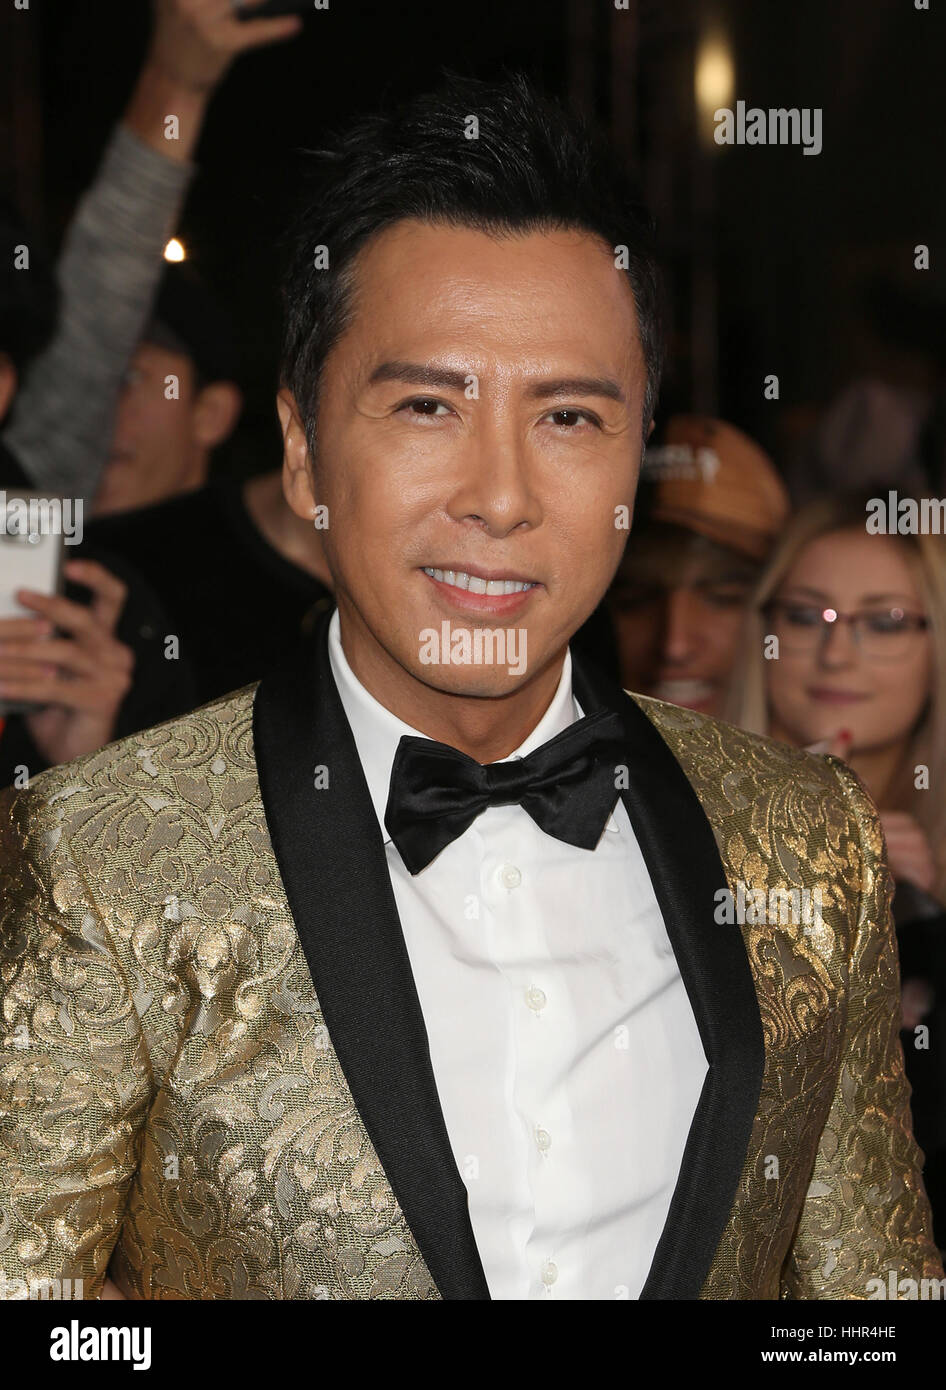 Hollywood CA - JANUARY 19: Donnie Yen, At Premiere Of Paramount Pictures' "xXx: Return Of Xander Cage", At TCL Chinese Theatre IMAX In California on January 19, 2017. Credit: Faye Sadou/MediaPunch Stock Photo